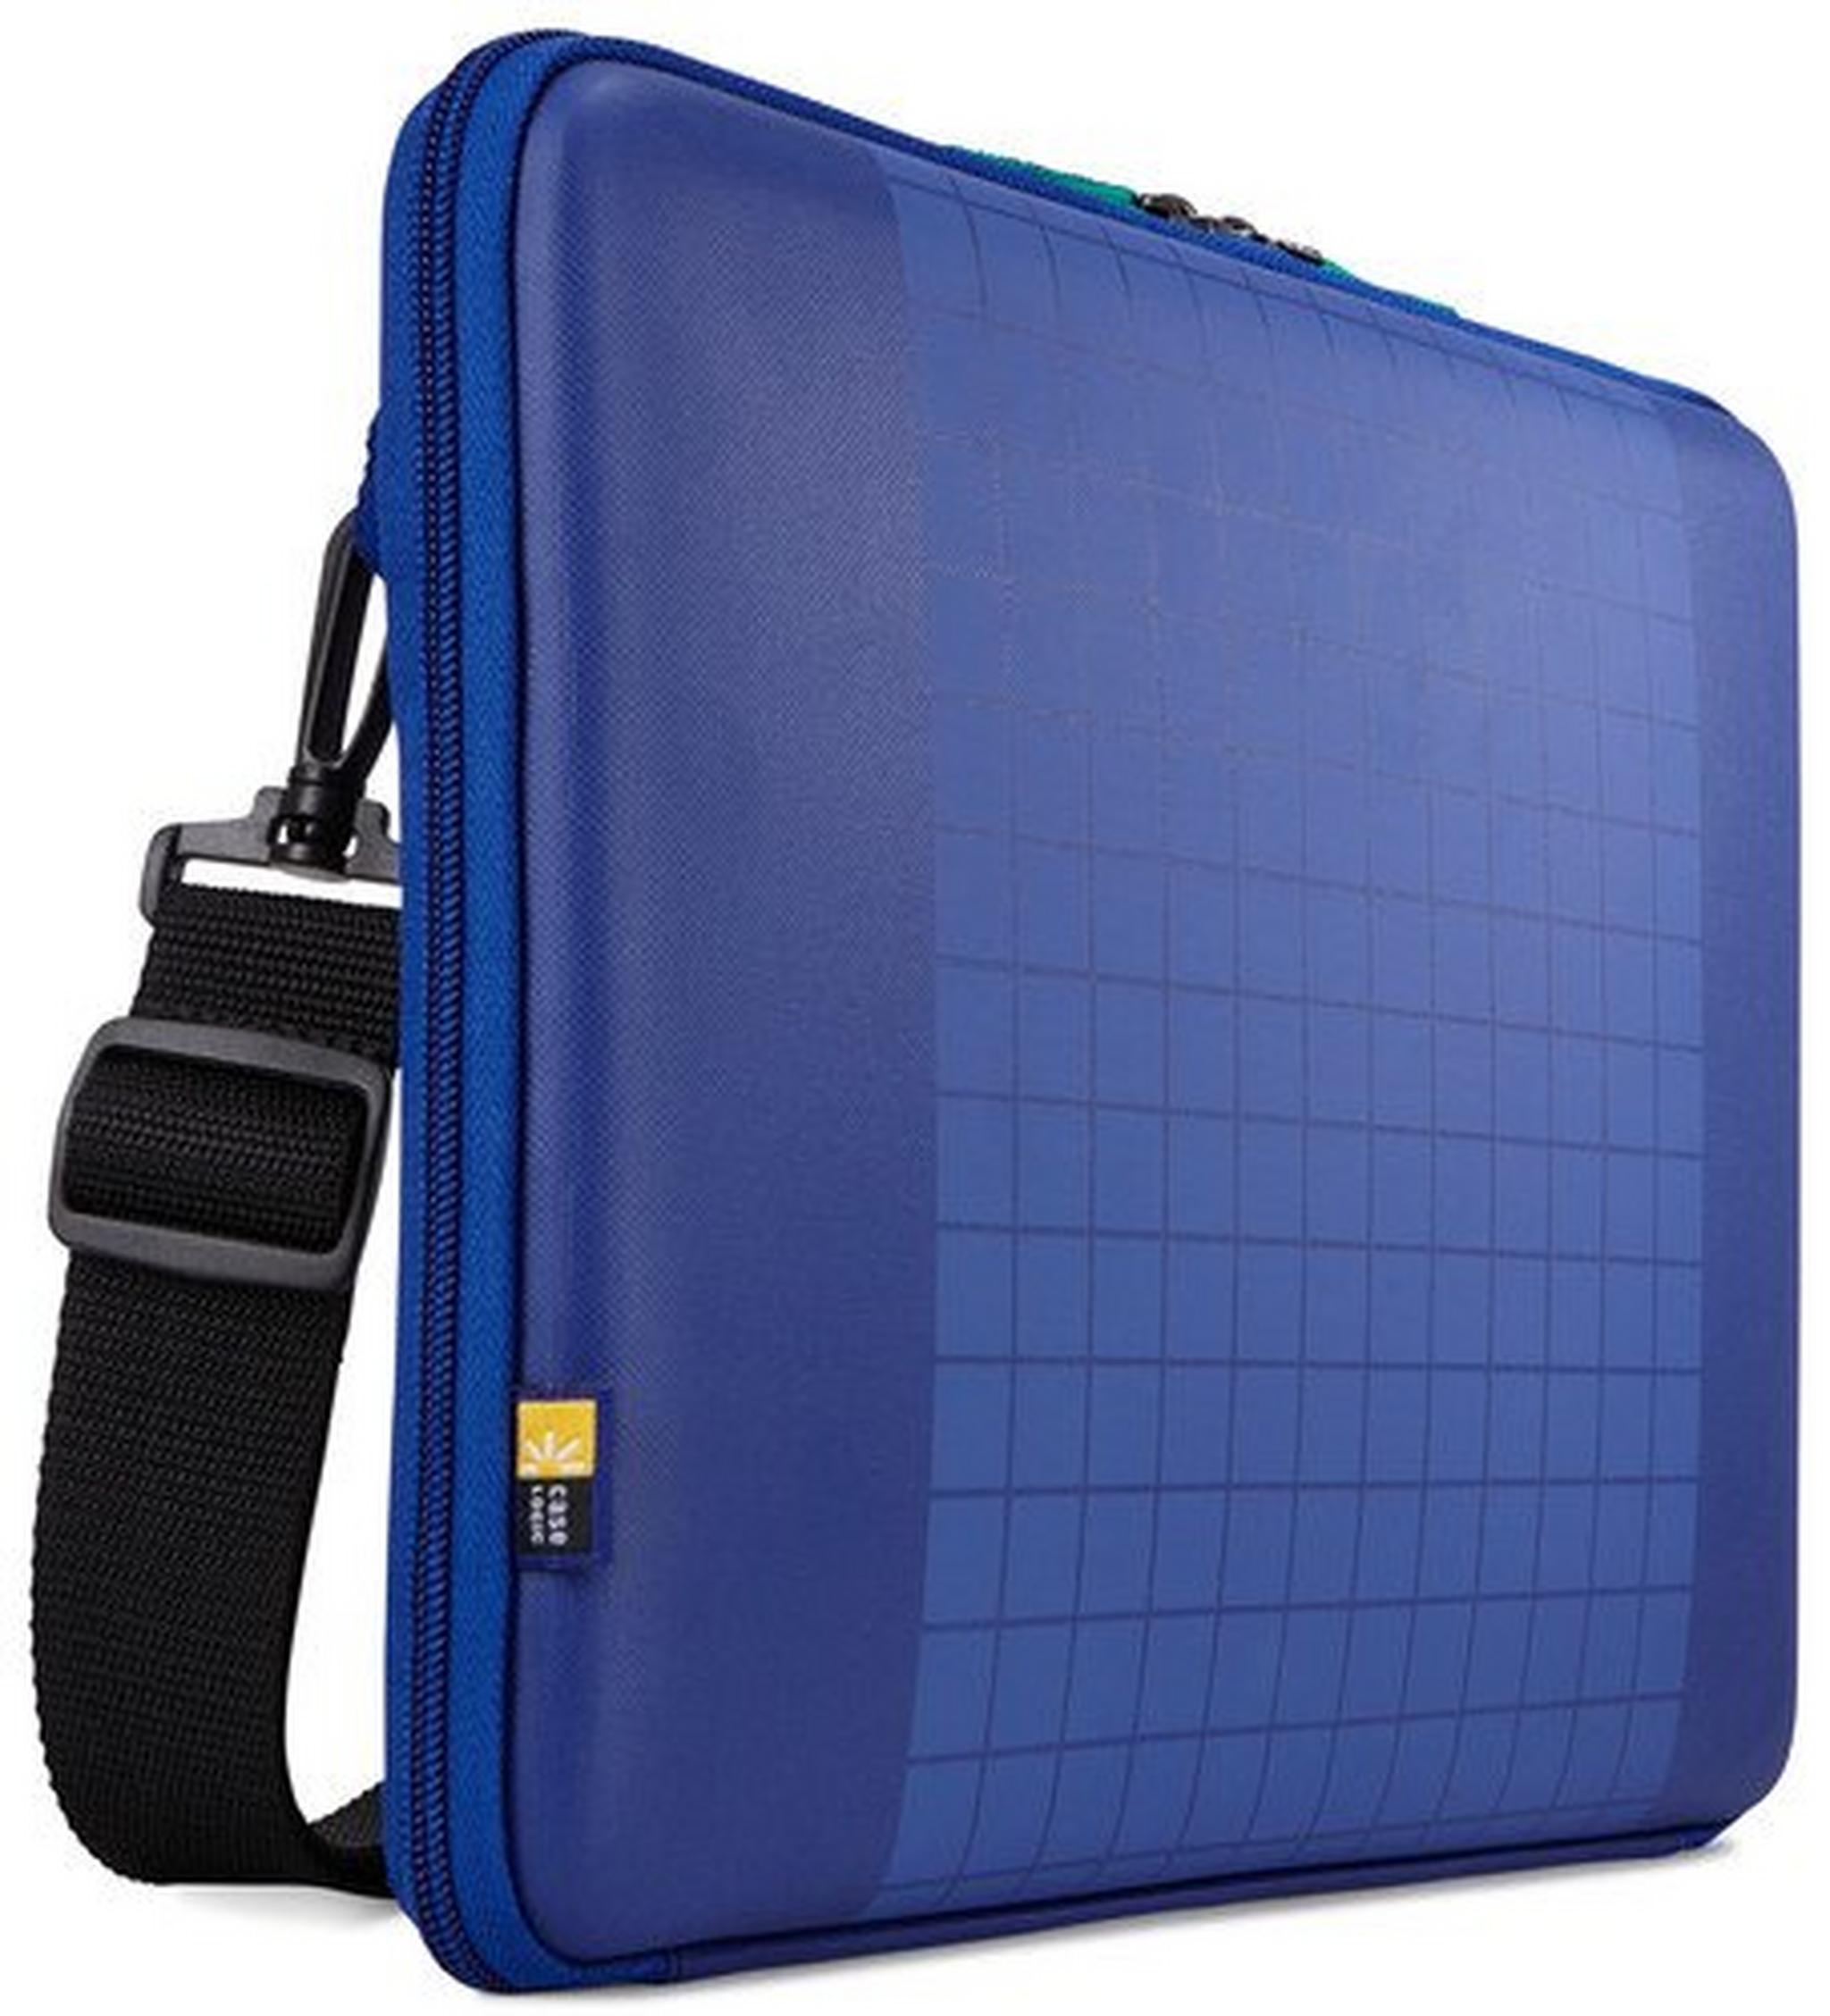 Case Logic Arca Protective Carrying Case for 11.6-inch Laptop (ARC-111) – Blue